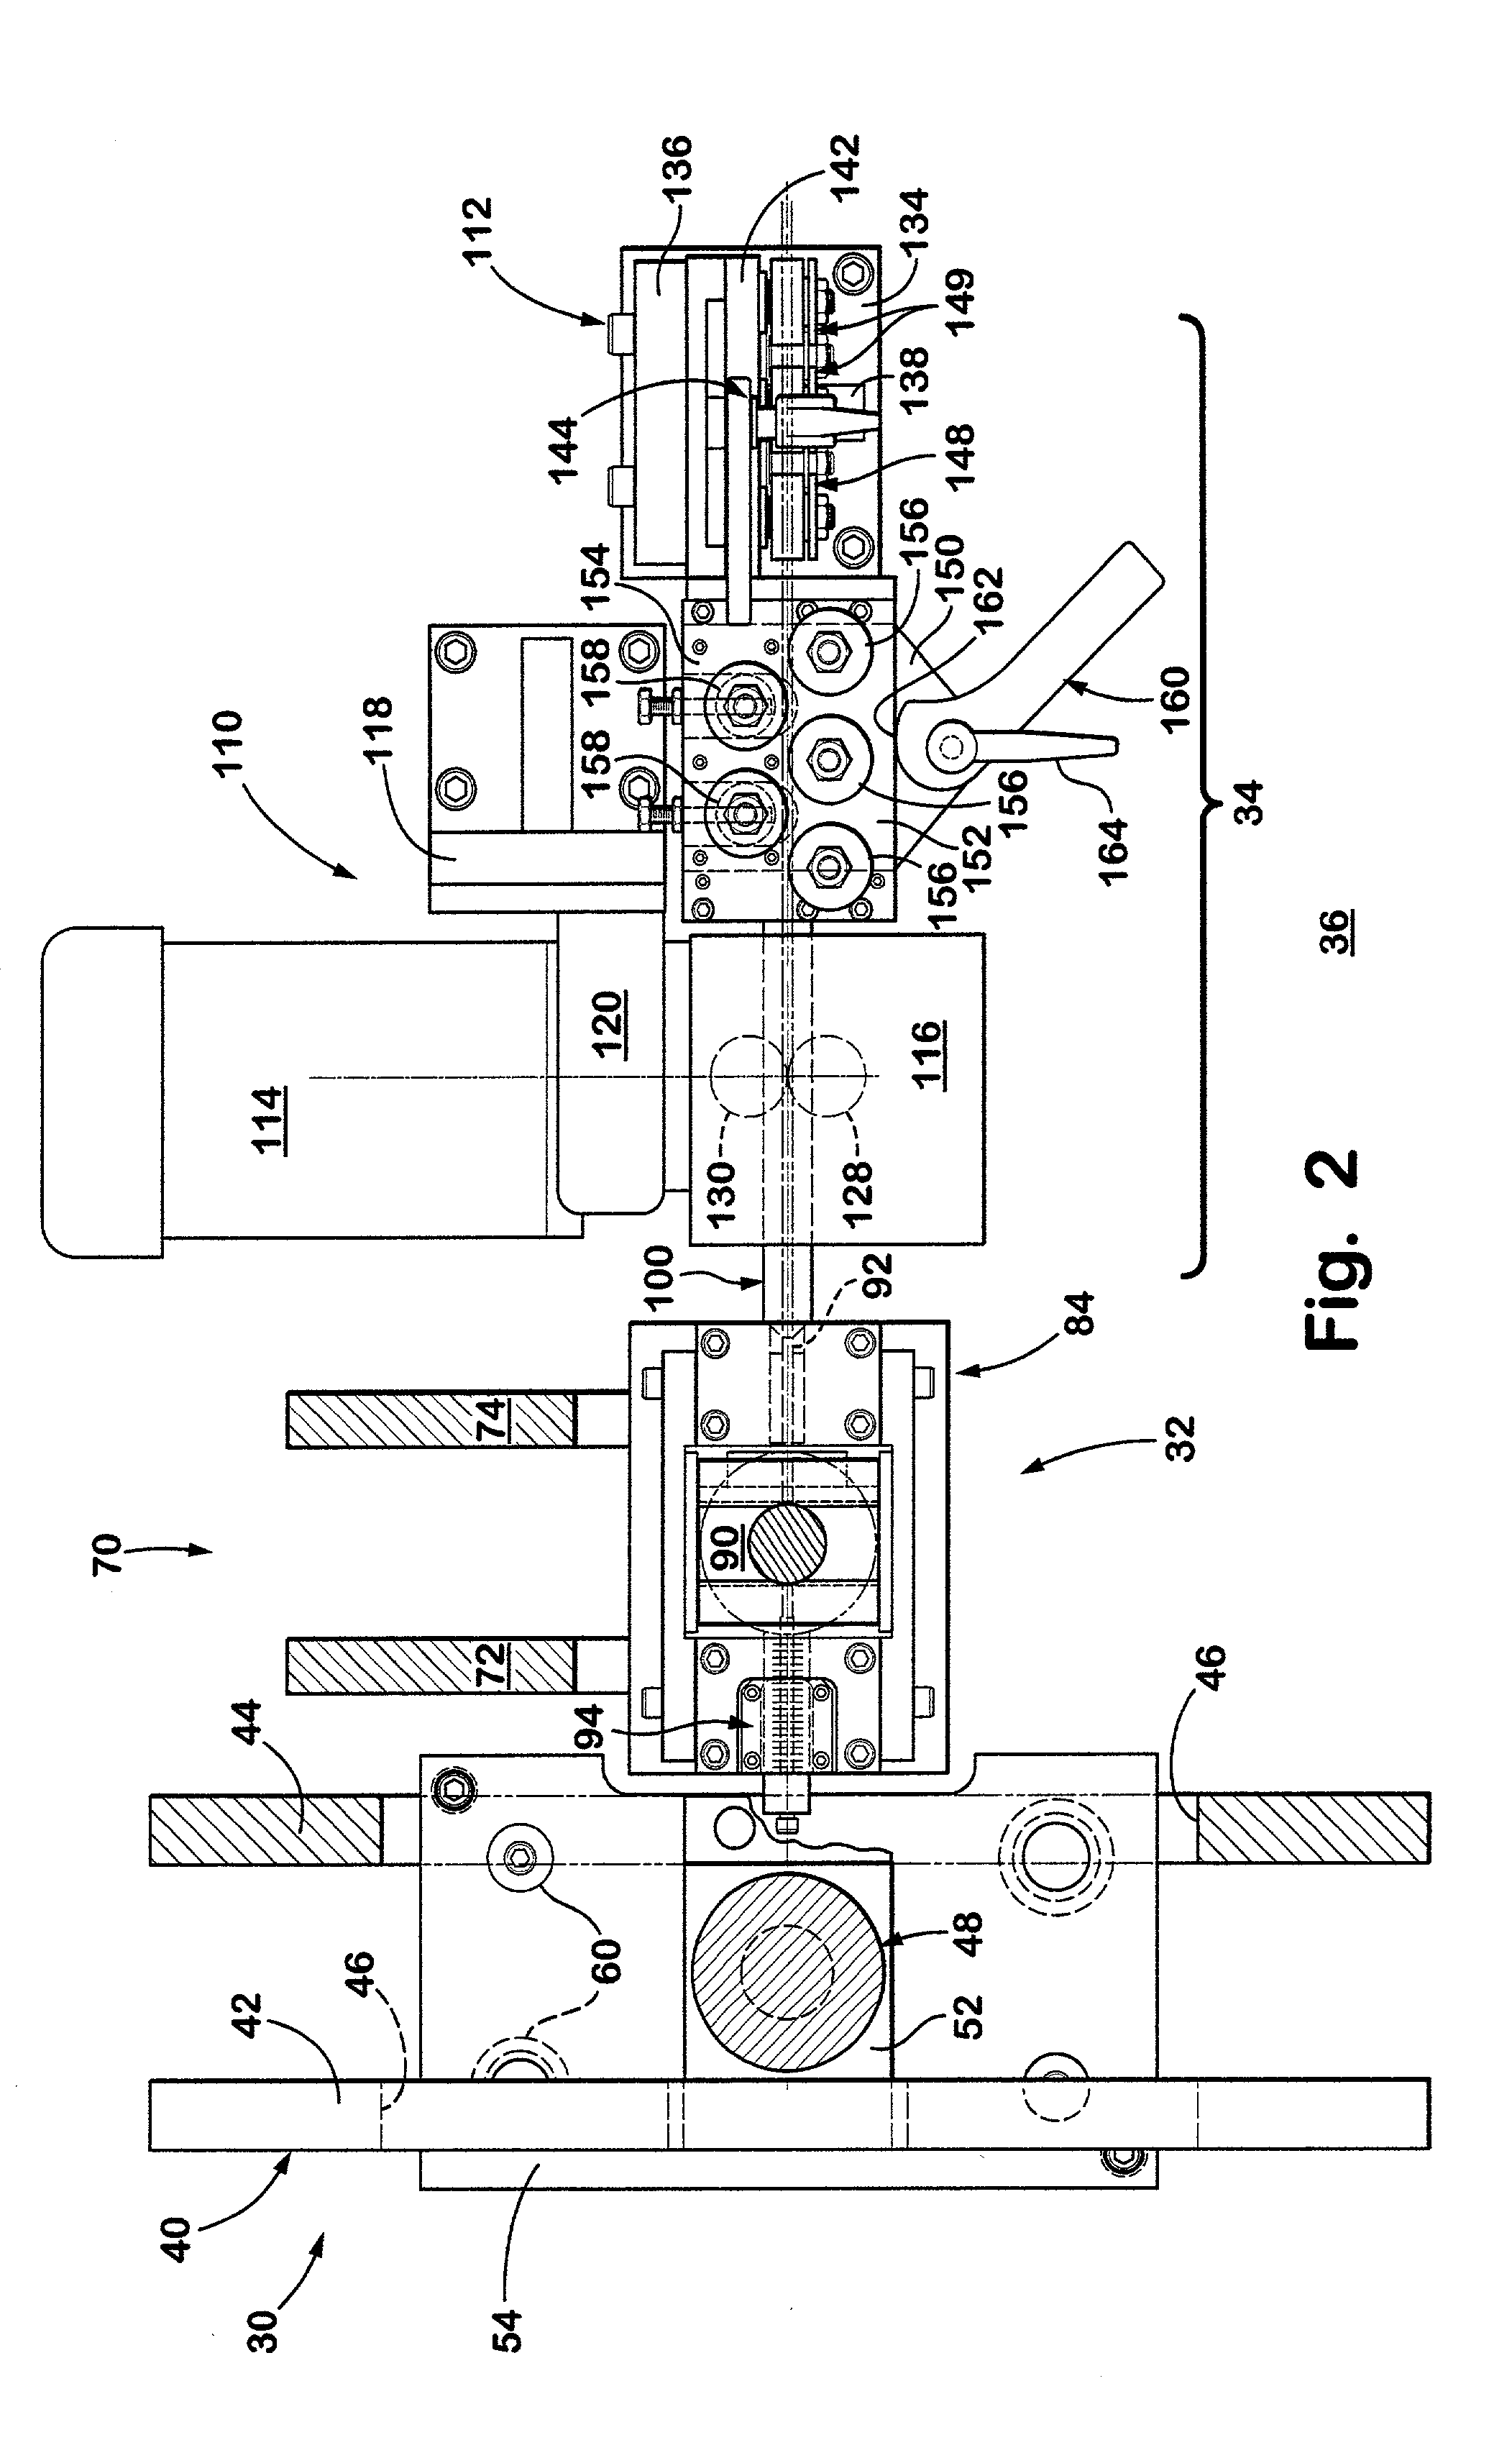 Method and apparatus for manufacturing hinges